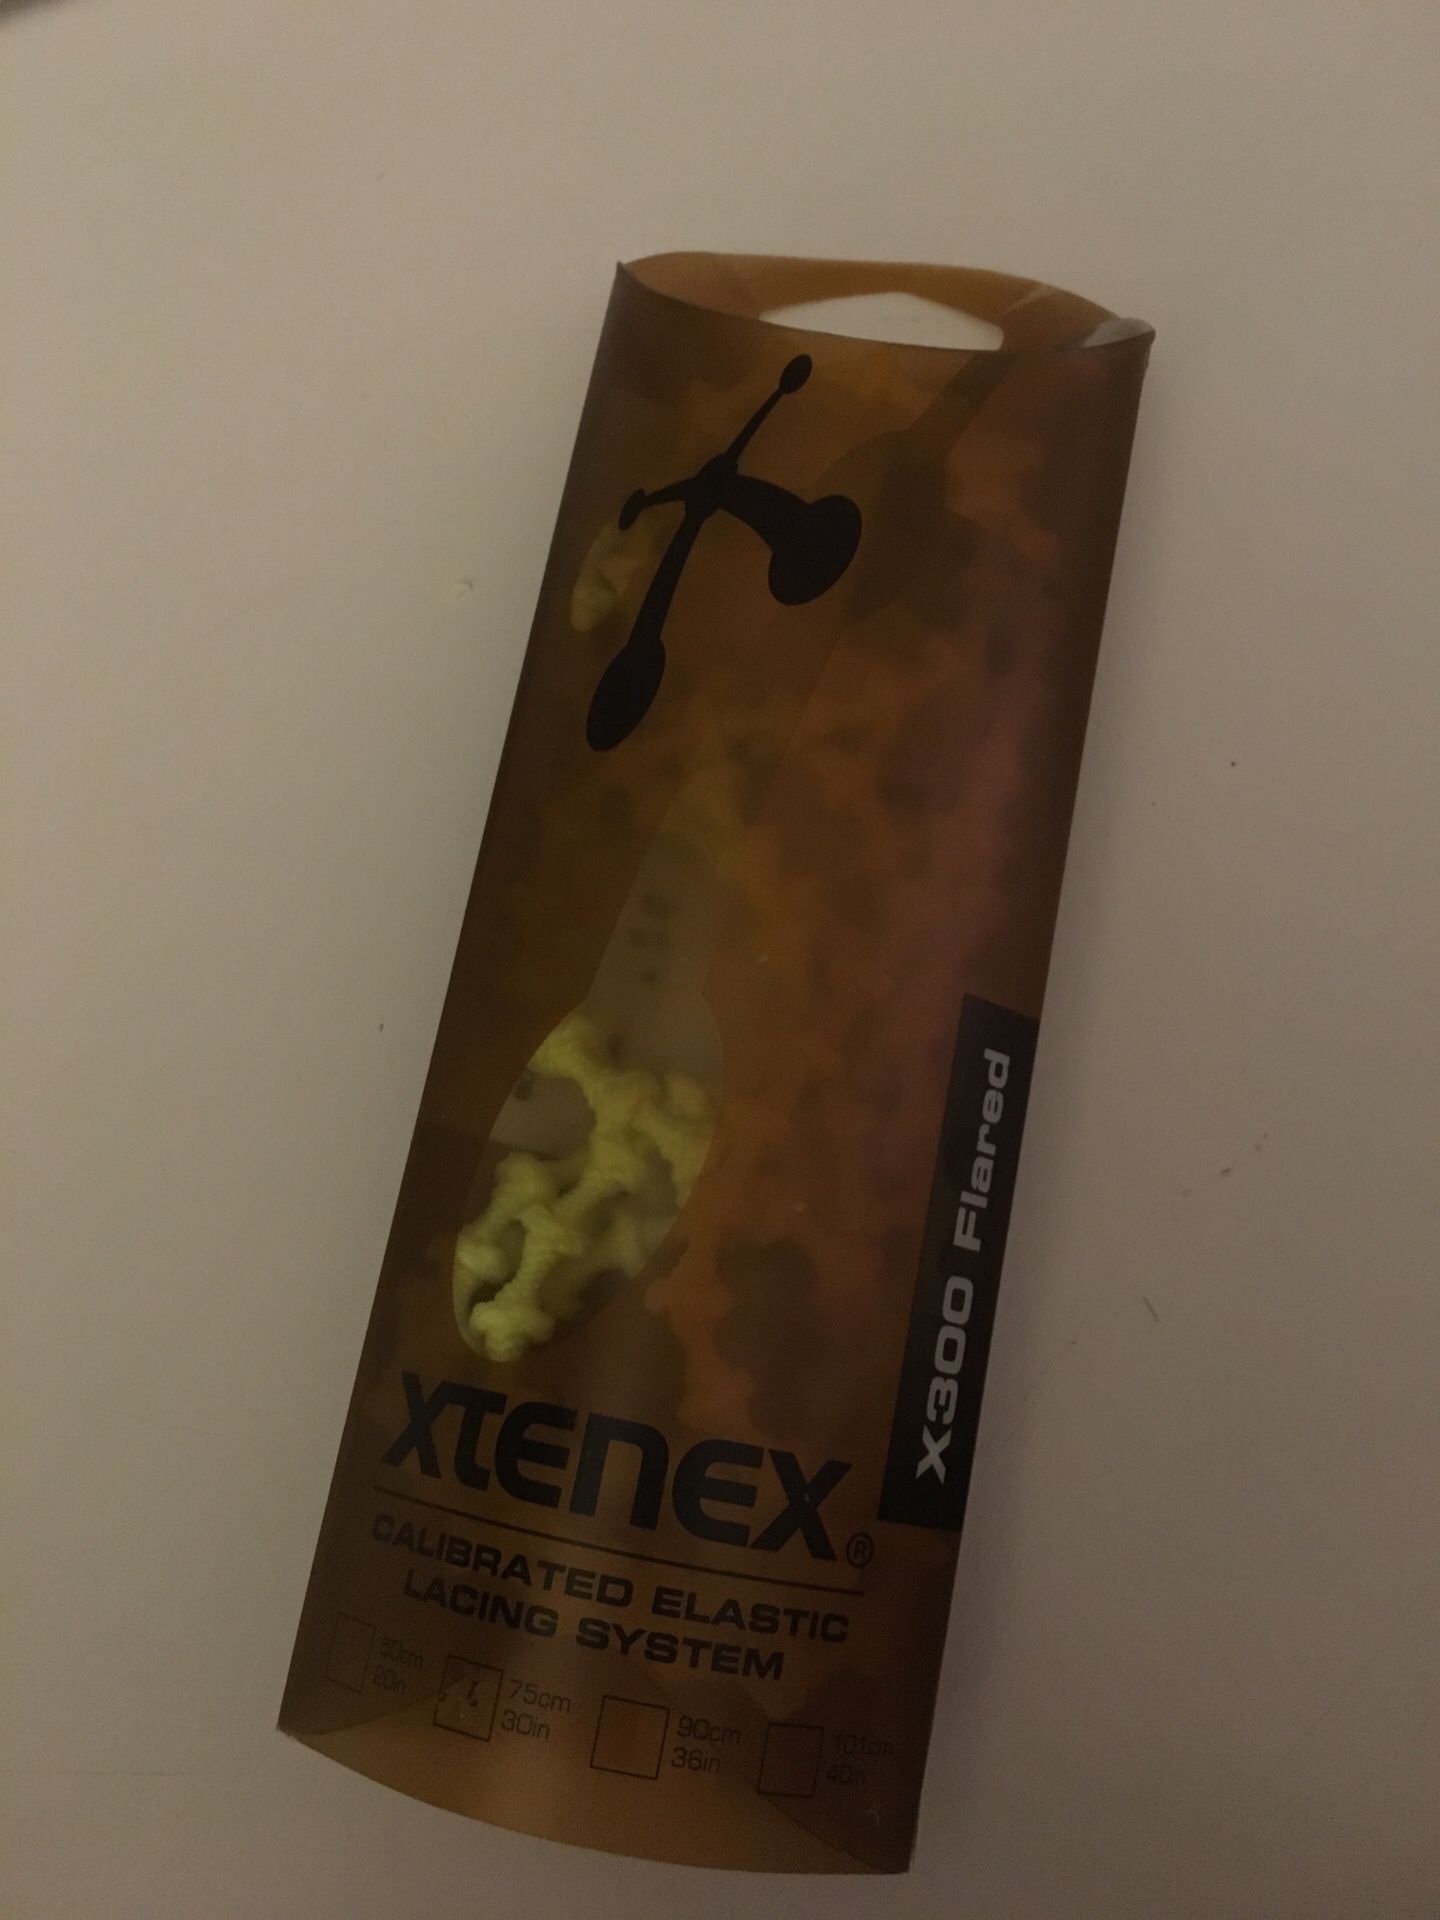 Xtenex X300 Flared (runners shoe laces)